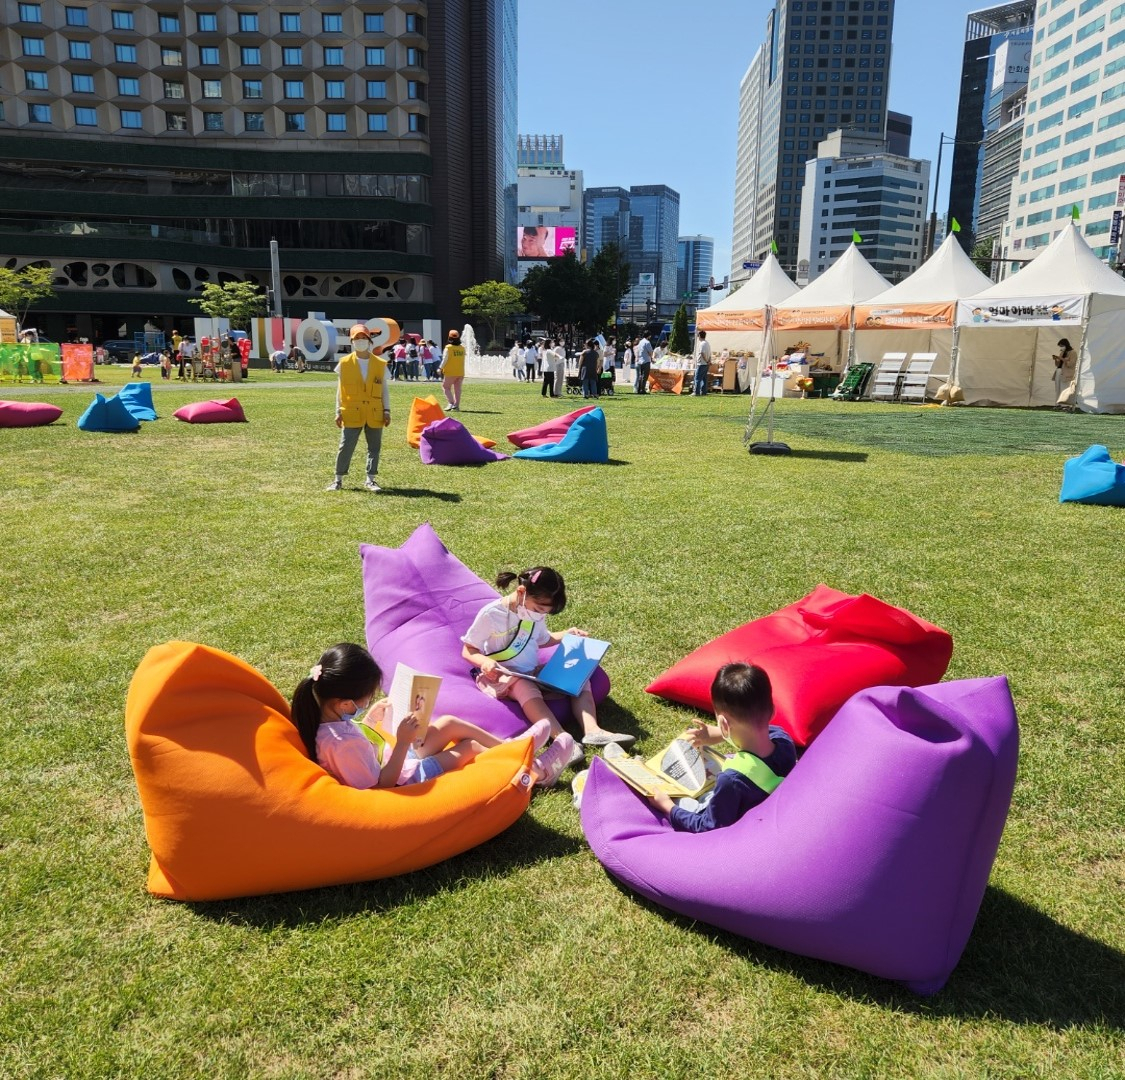 Children read books at Seoul Plaza in front of City Hall in Seoul on Sept. 2 as part of an outdoor mobile library event organized by the city government. (Choi Jae-hee / The Korea Herald)